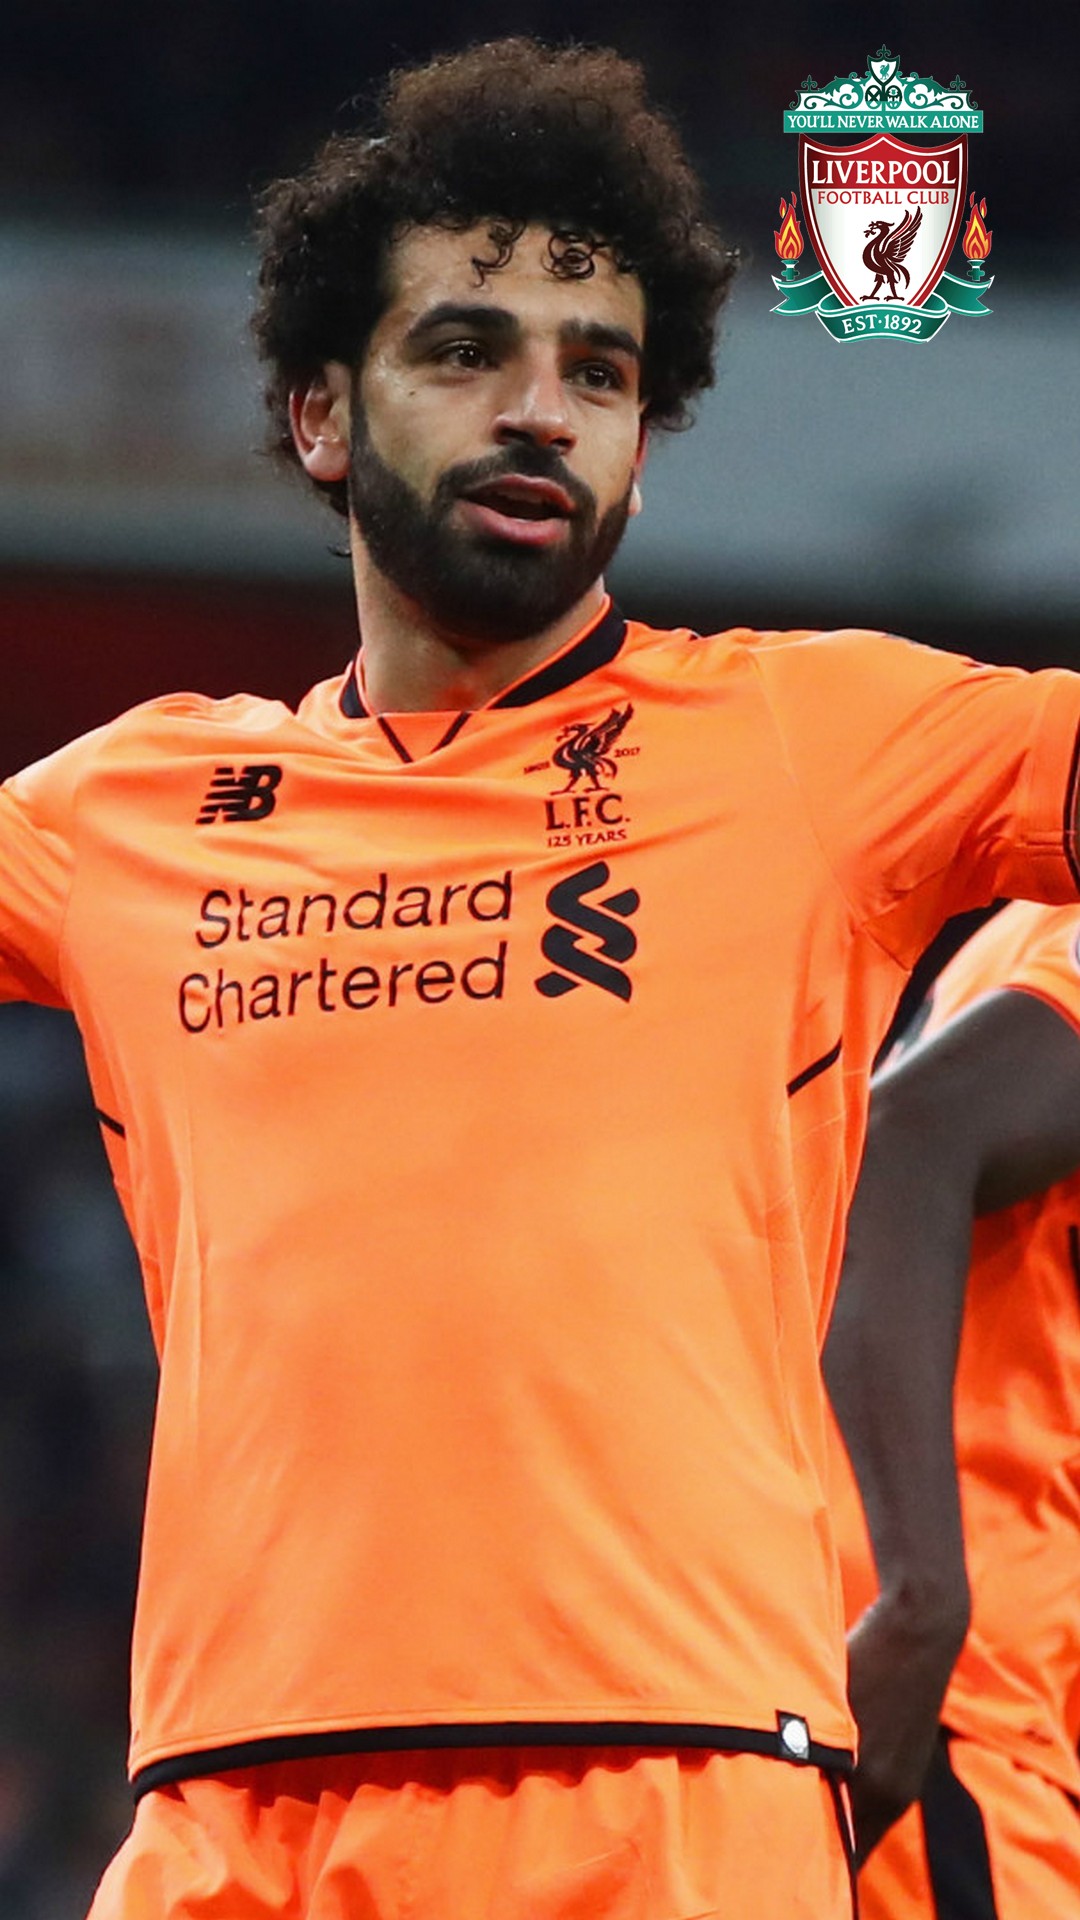 Wallpaper Liverpool Mohamed Salah Android with image resolution 1080x1920 pixel. You can make this wallpaper for your Android backgrounds, Tablet, Smartphones Screensavers and Mobile Phone Lock Screen